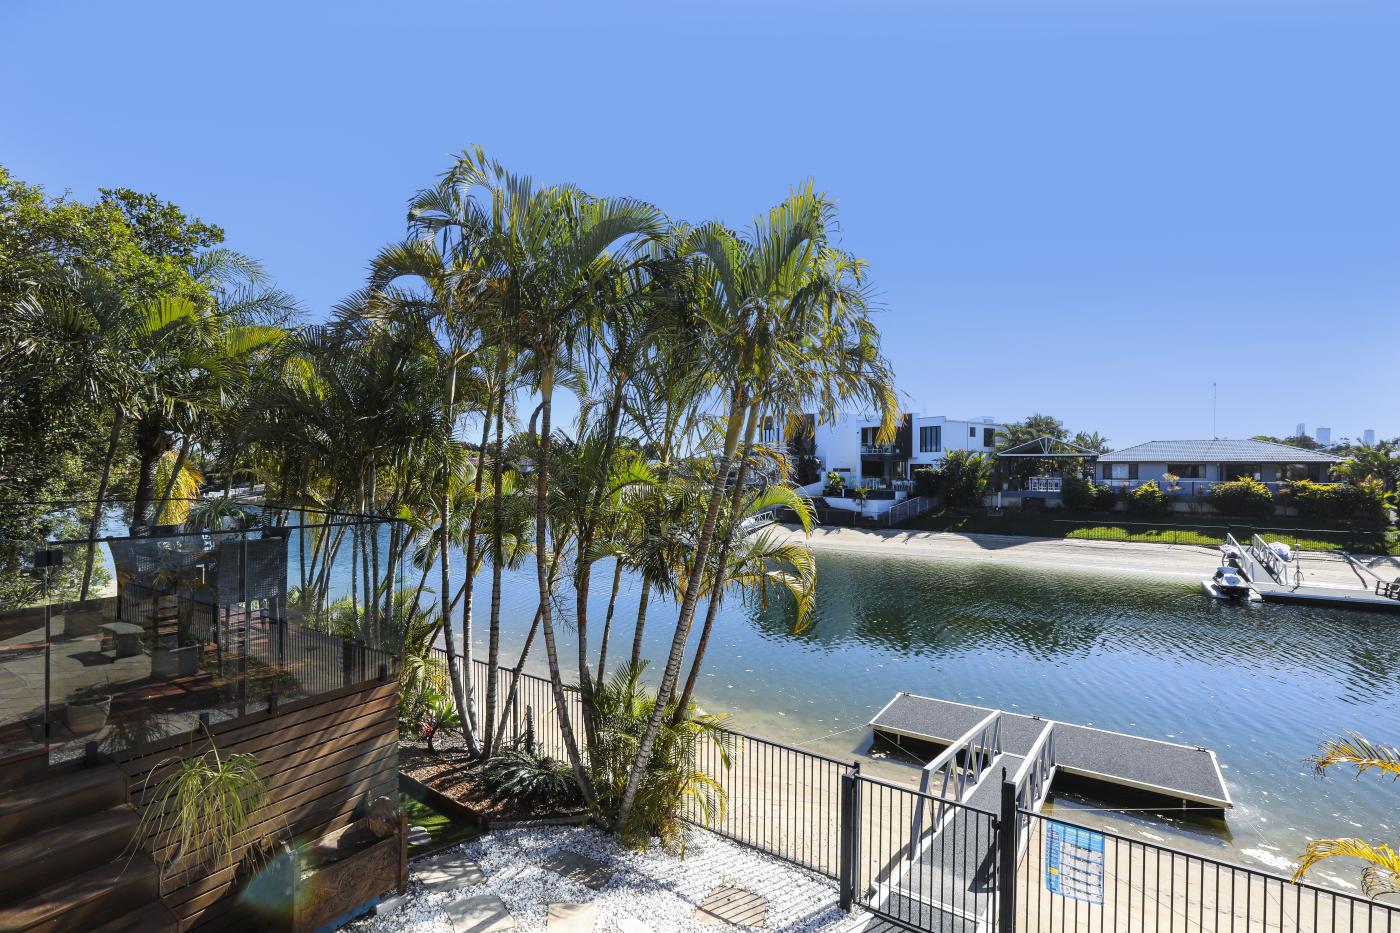 M-Motion Real Estate Agency, 27 Coobowie Street, Broadbeach Waters, Qld 4218, Michael Mahon, Lauren Mahon, Best Real Estate Agent Gold Coast